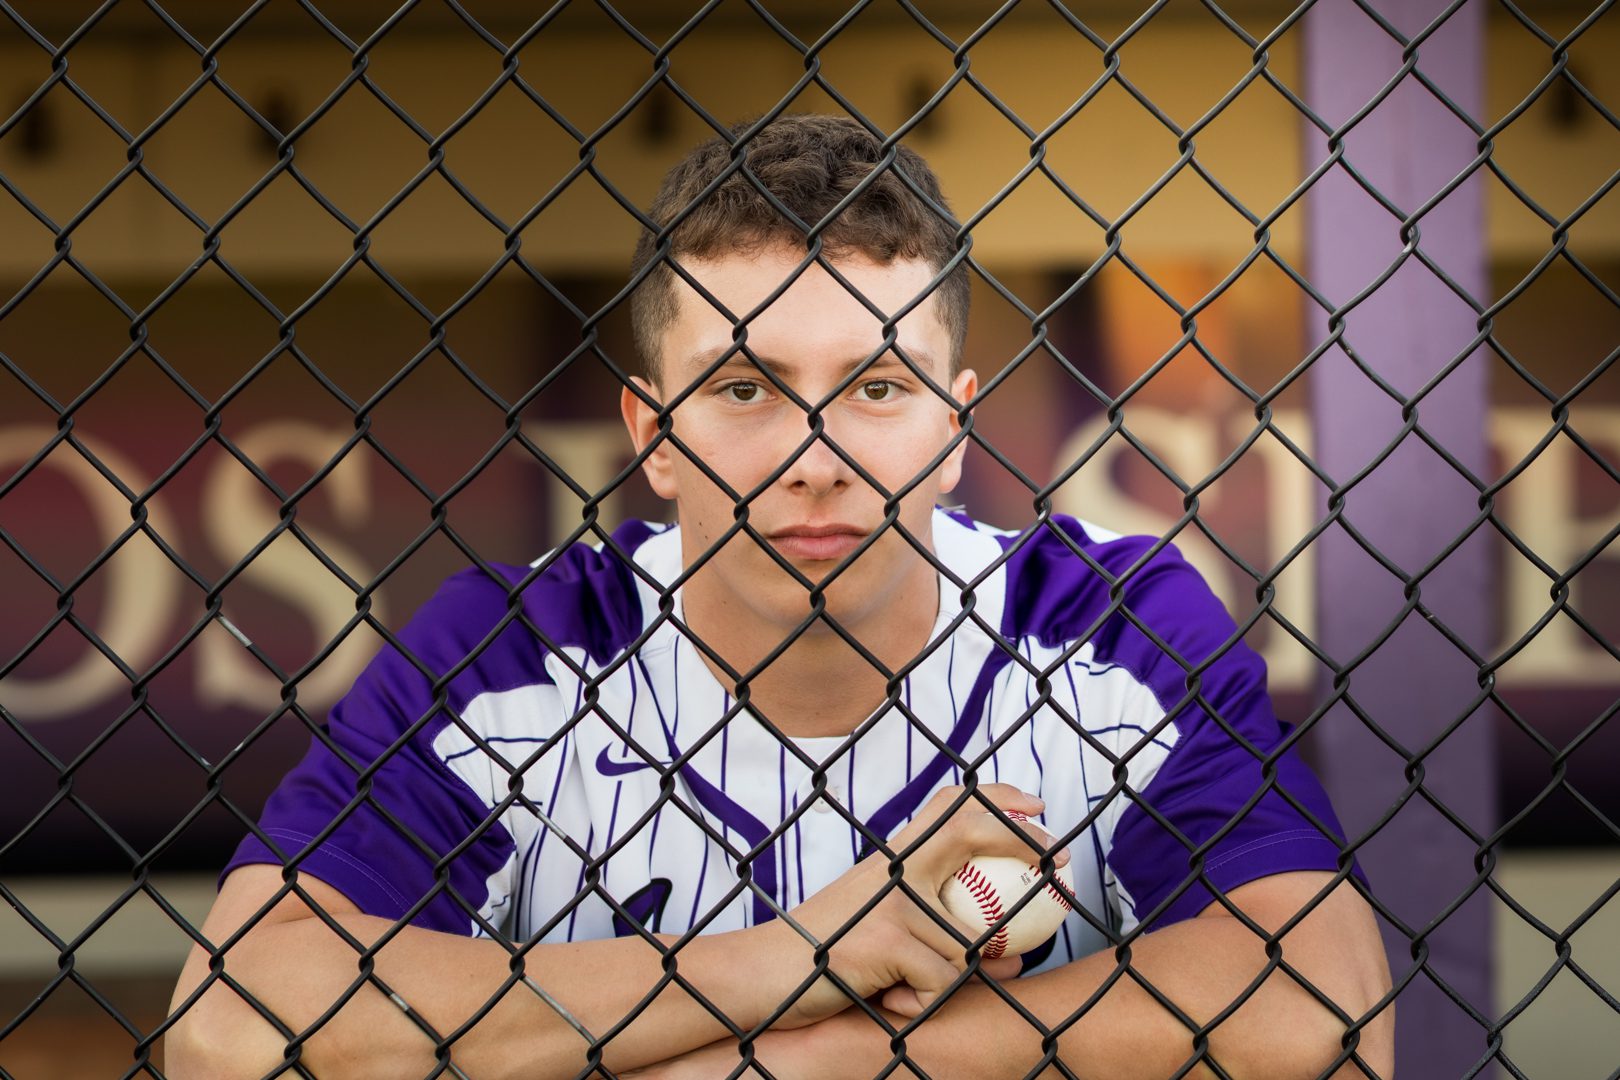 A baseball player is sitting in the dugout.